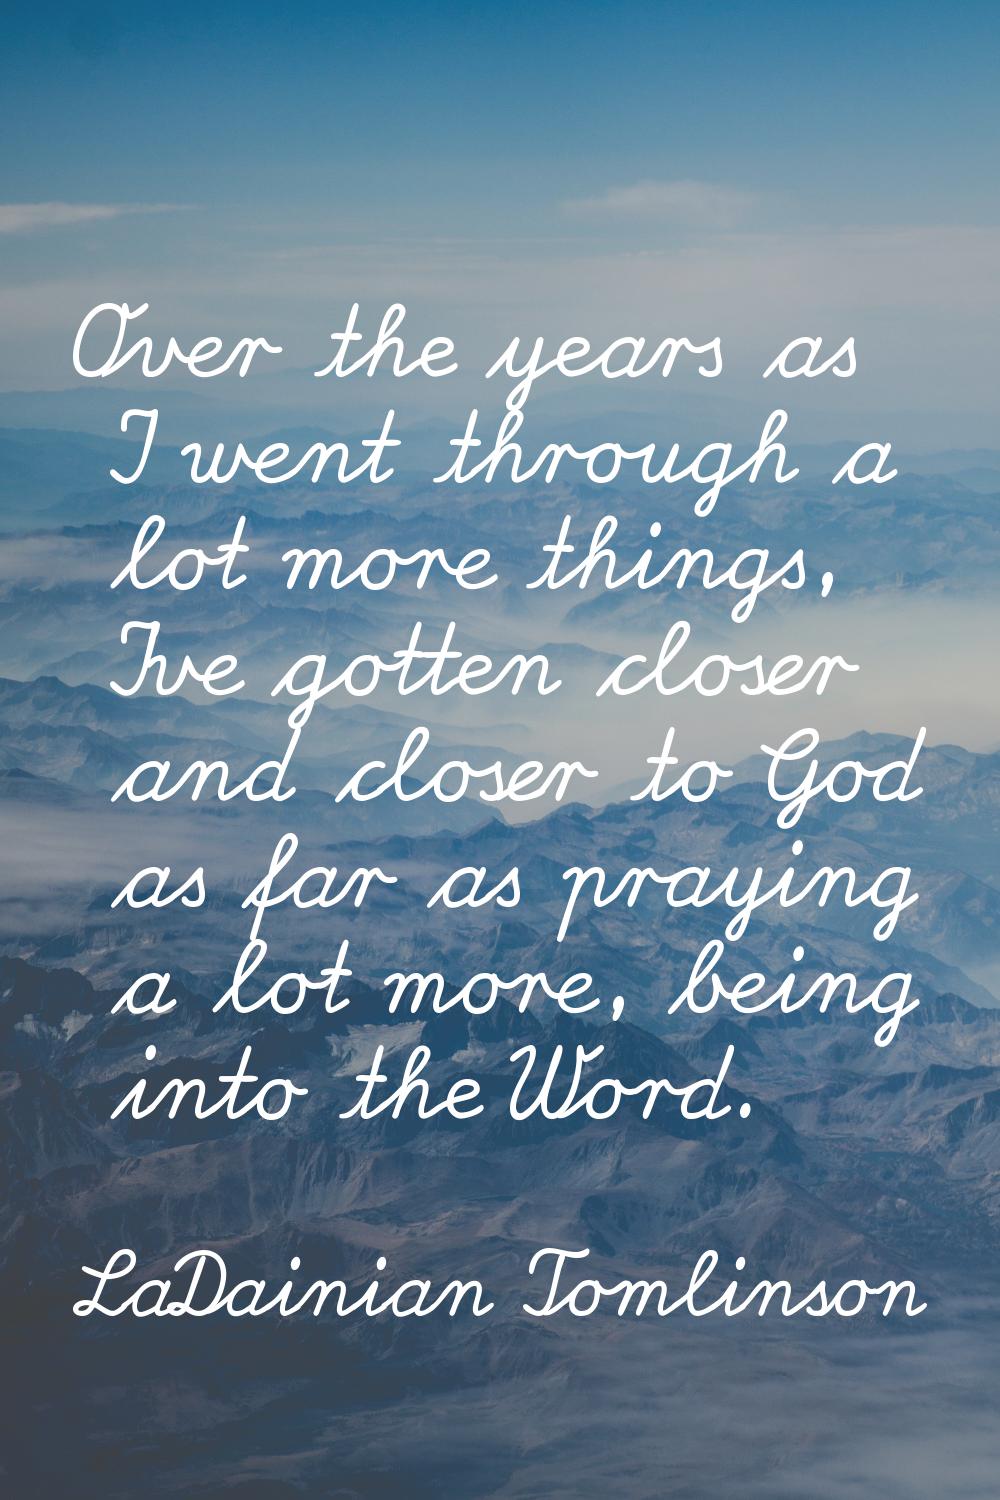 Over the years as I went through a lot more things, I've gotten closer and closer to God as far as 